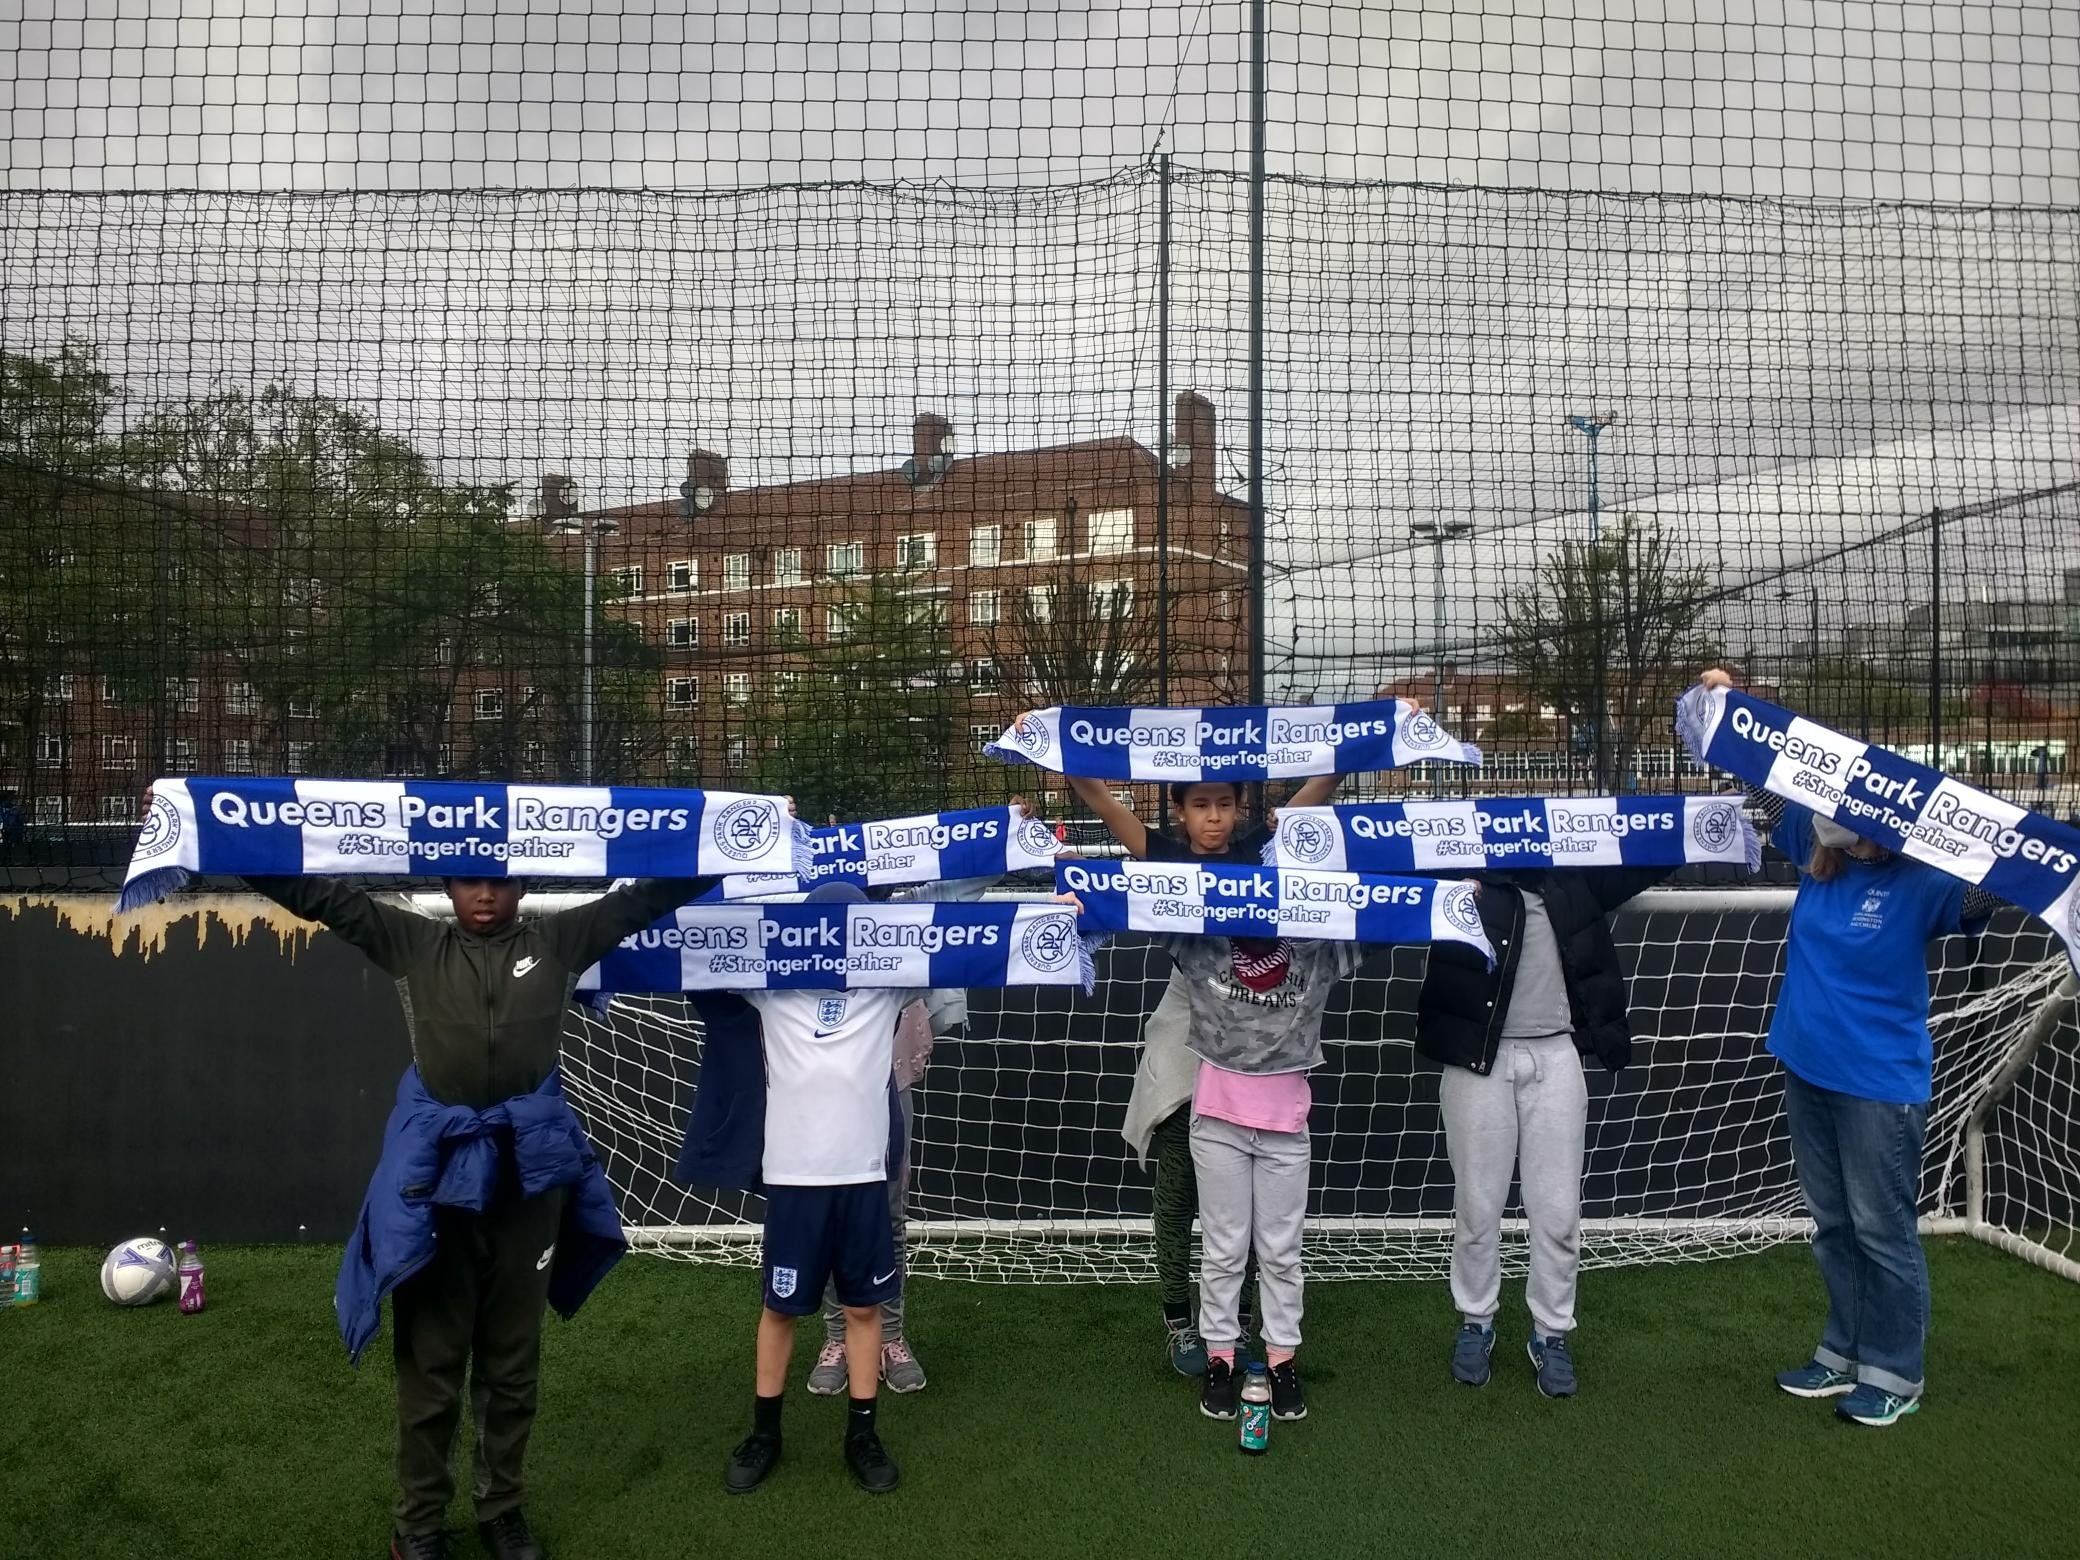 The children holding up QPR banners across their faces